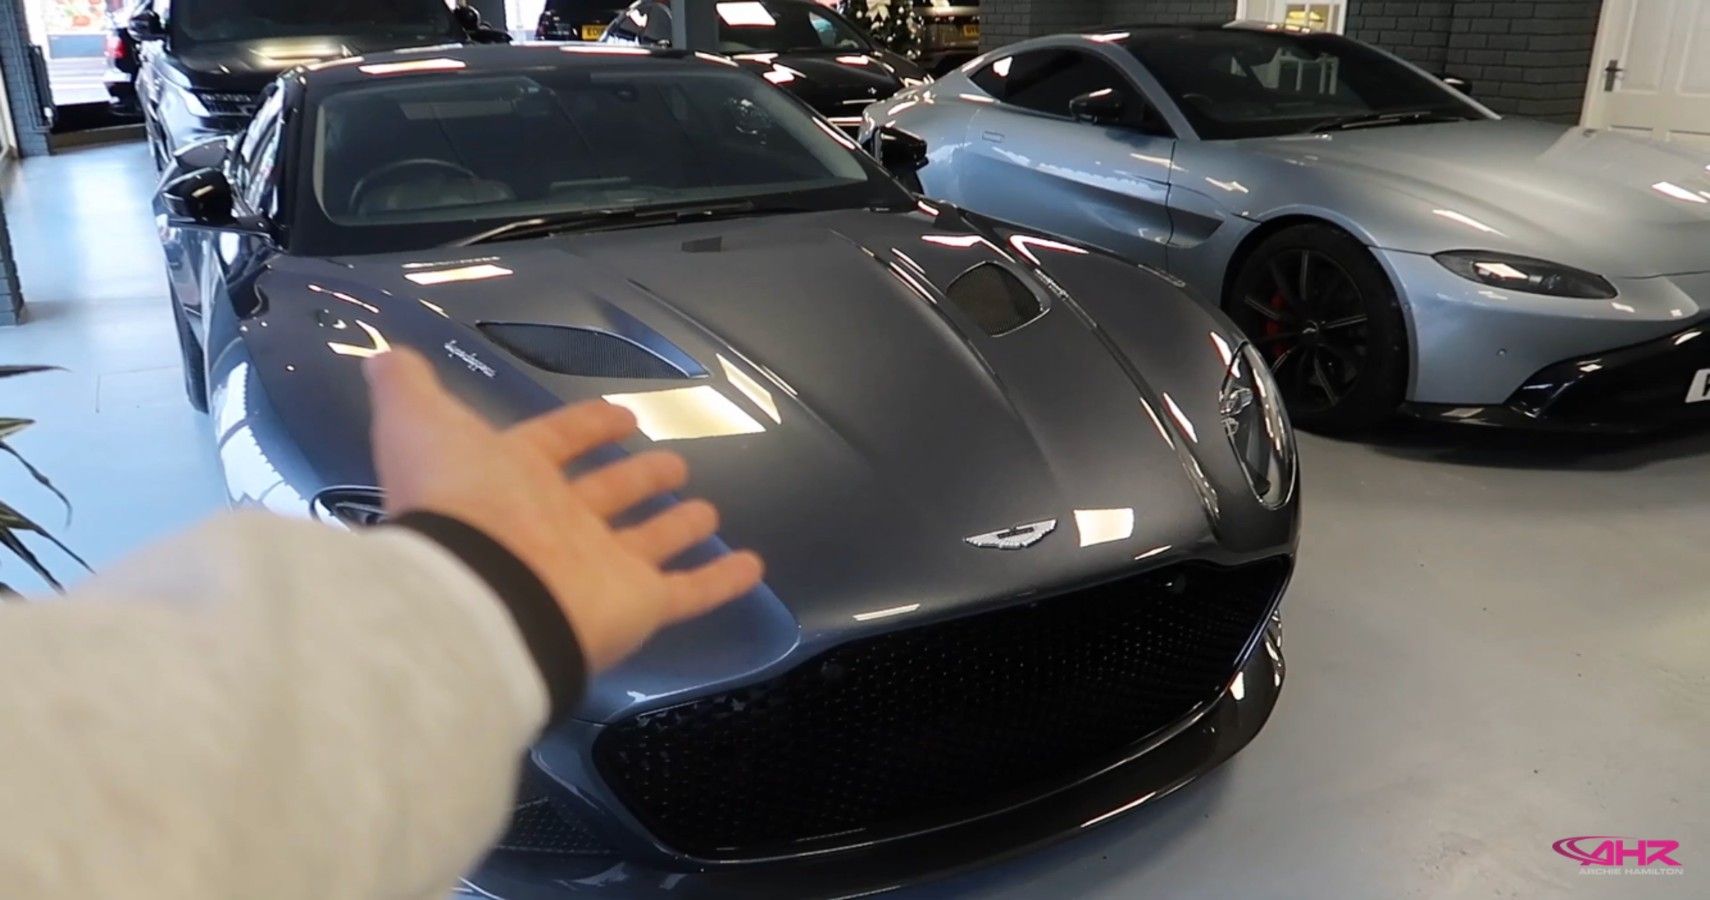 Archie Hamilton gives an inside look at the most popular cars for Footballers are